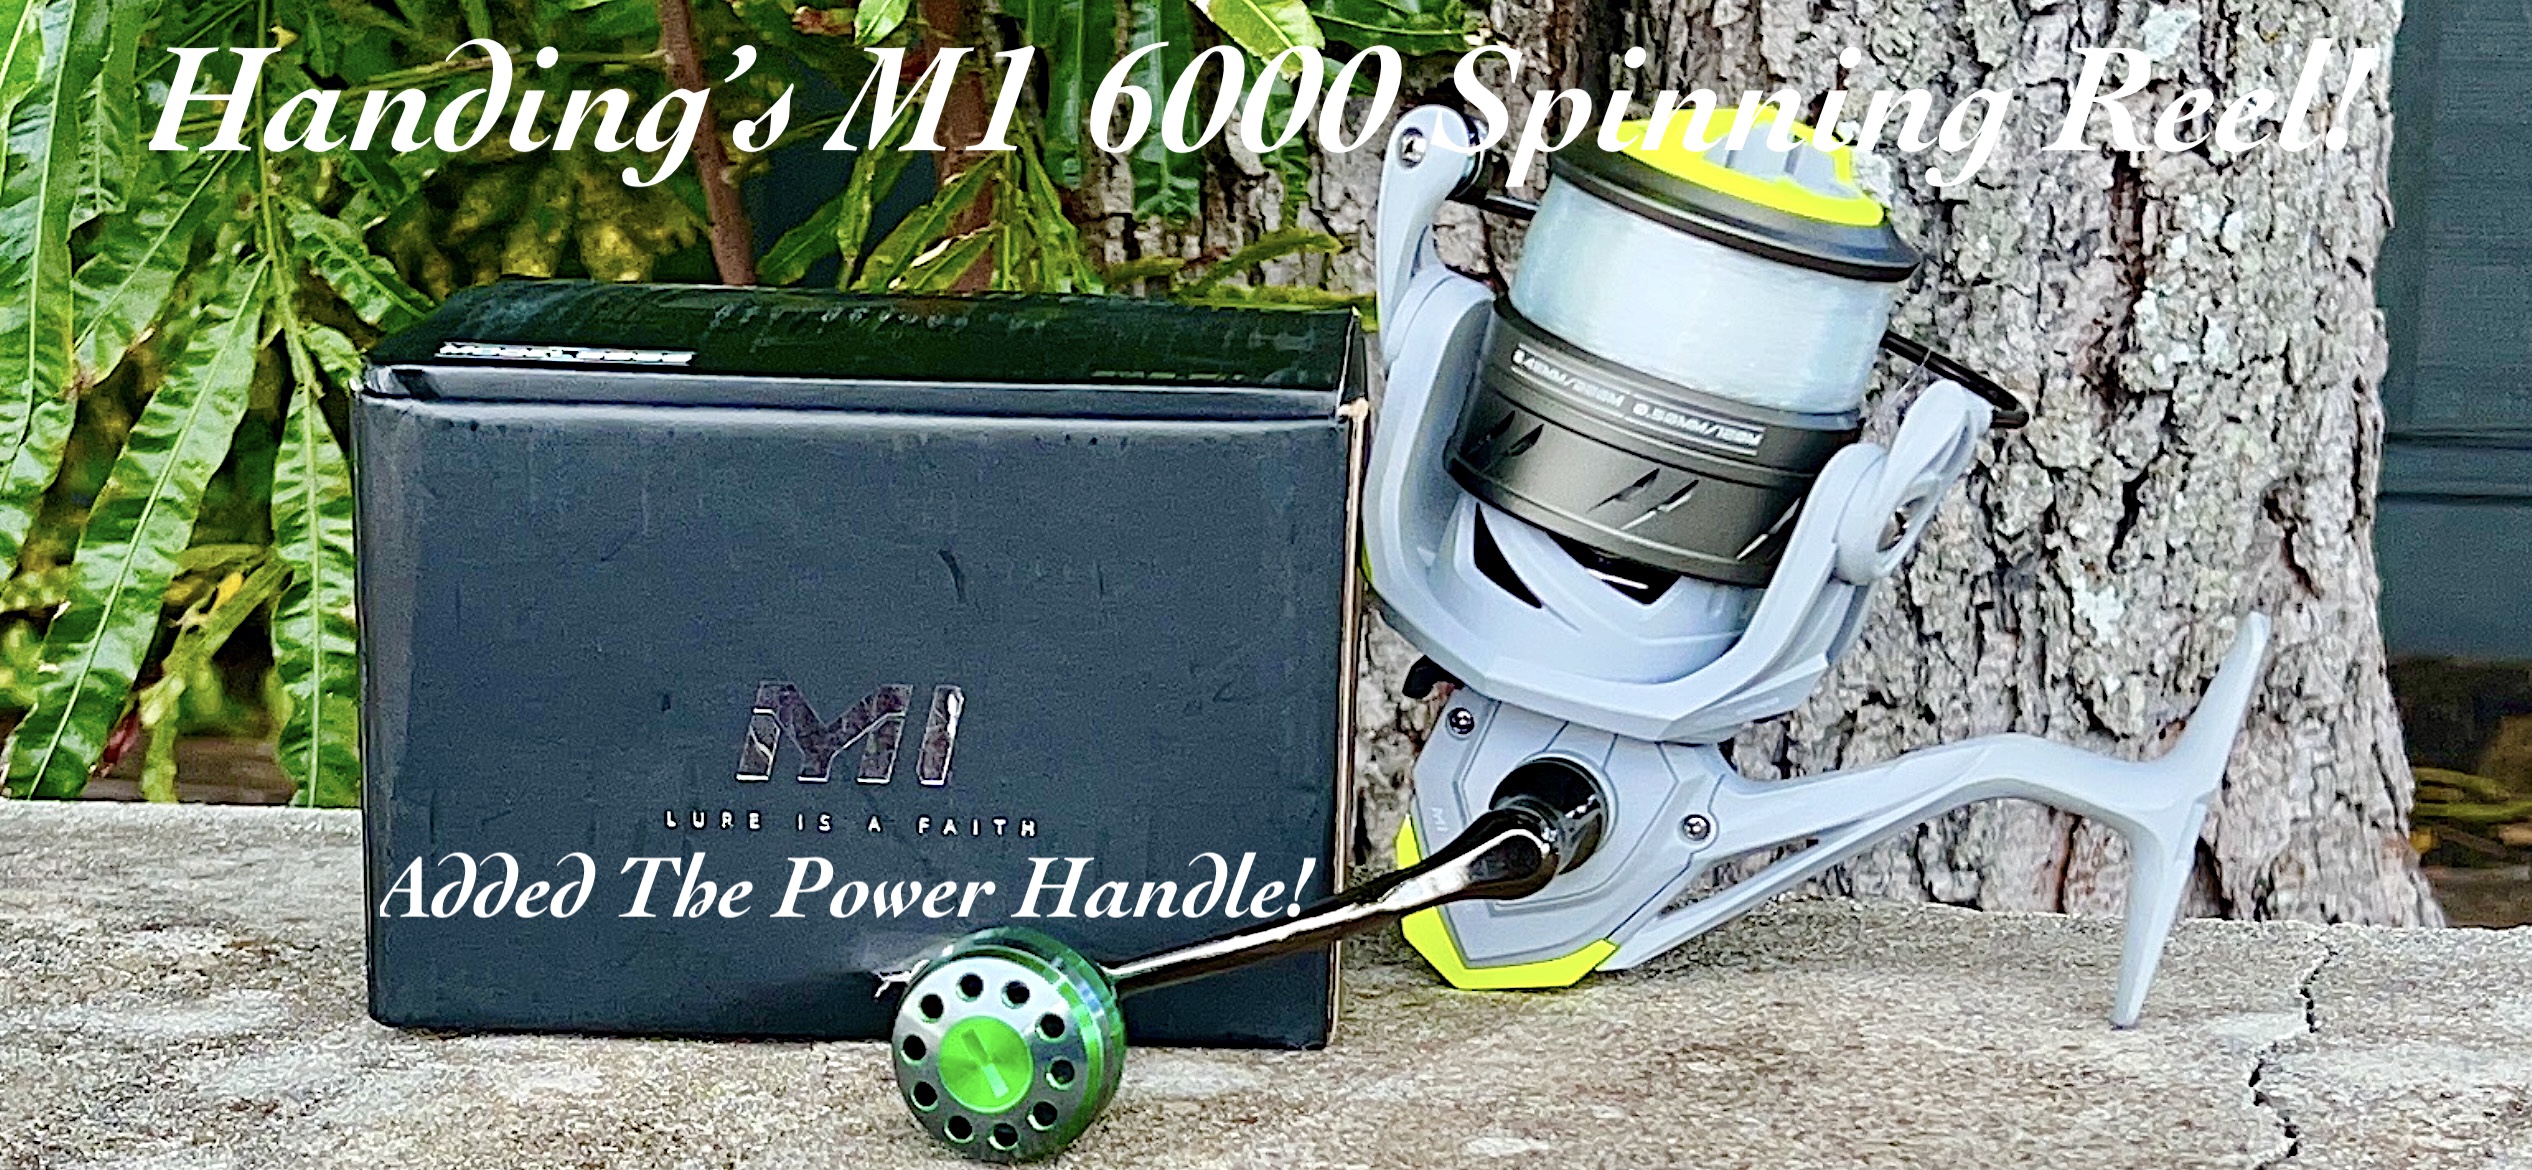 Most Powerful HANDING M1 Spinning Reel! Added a Goture Handle!